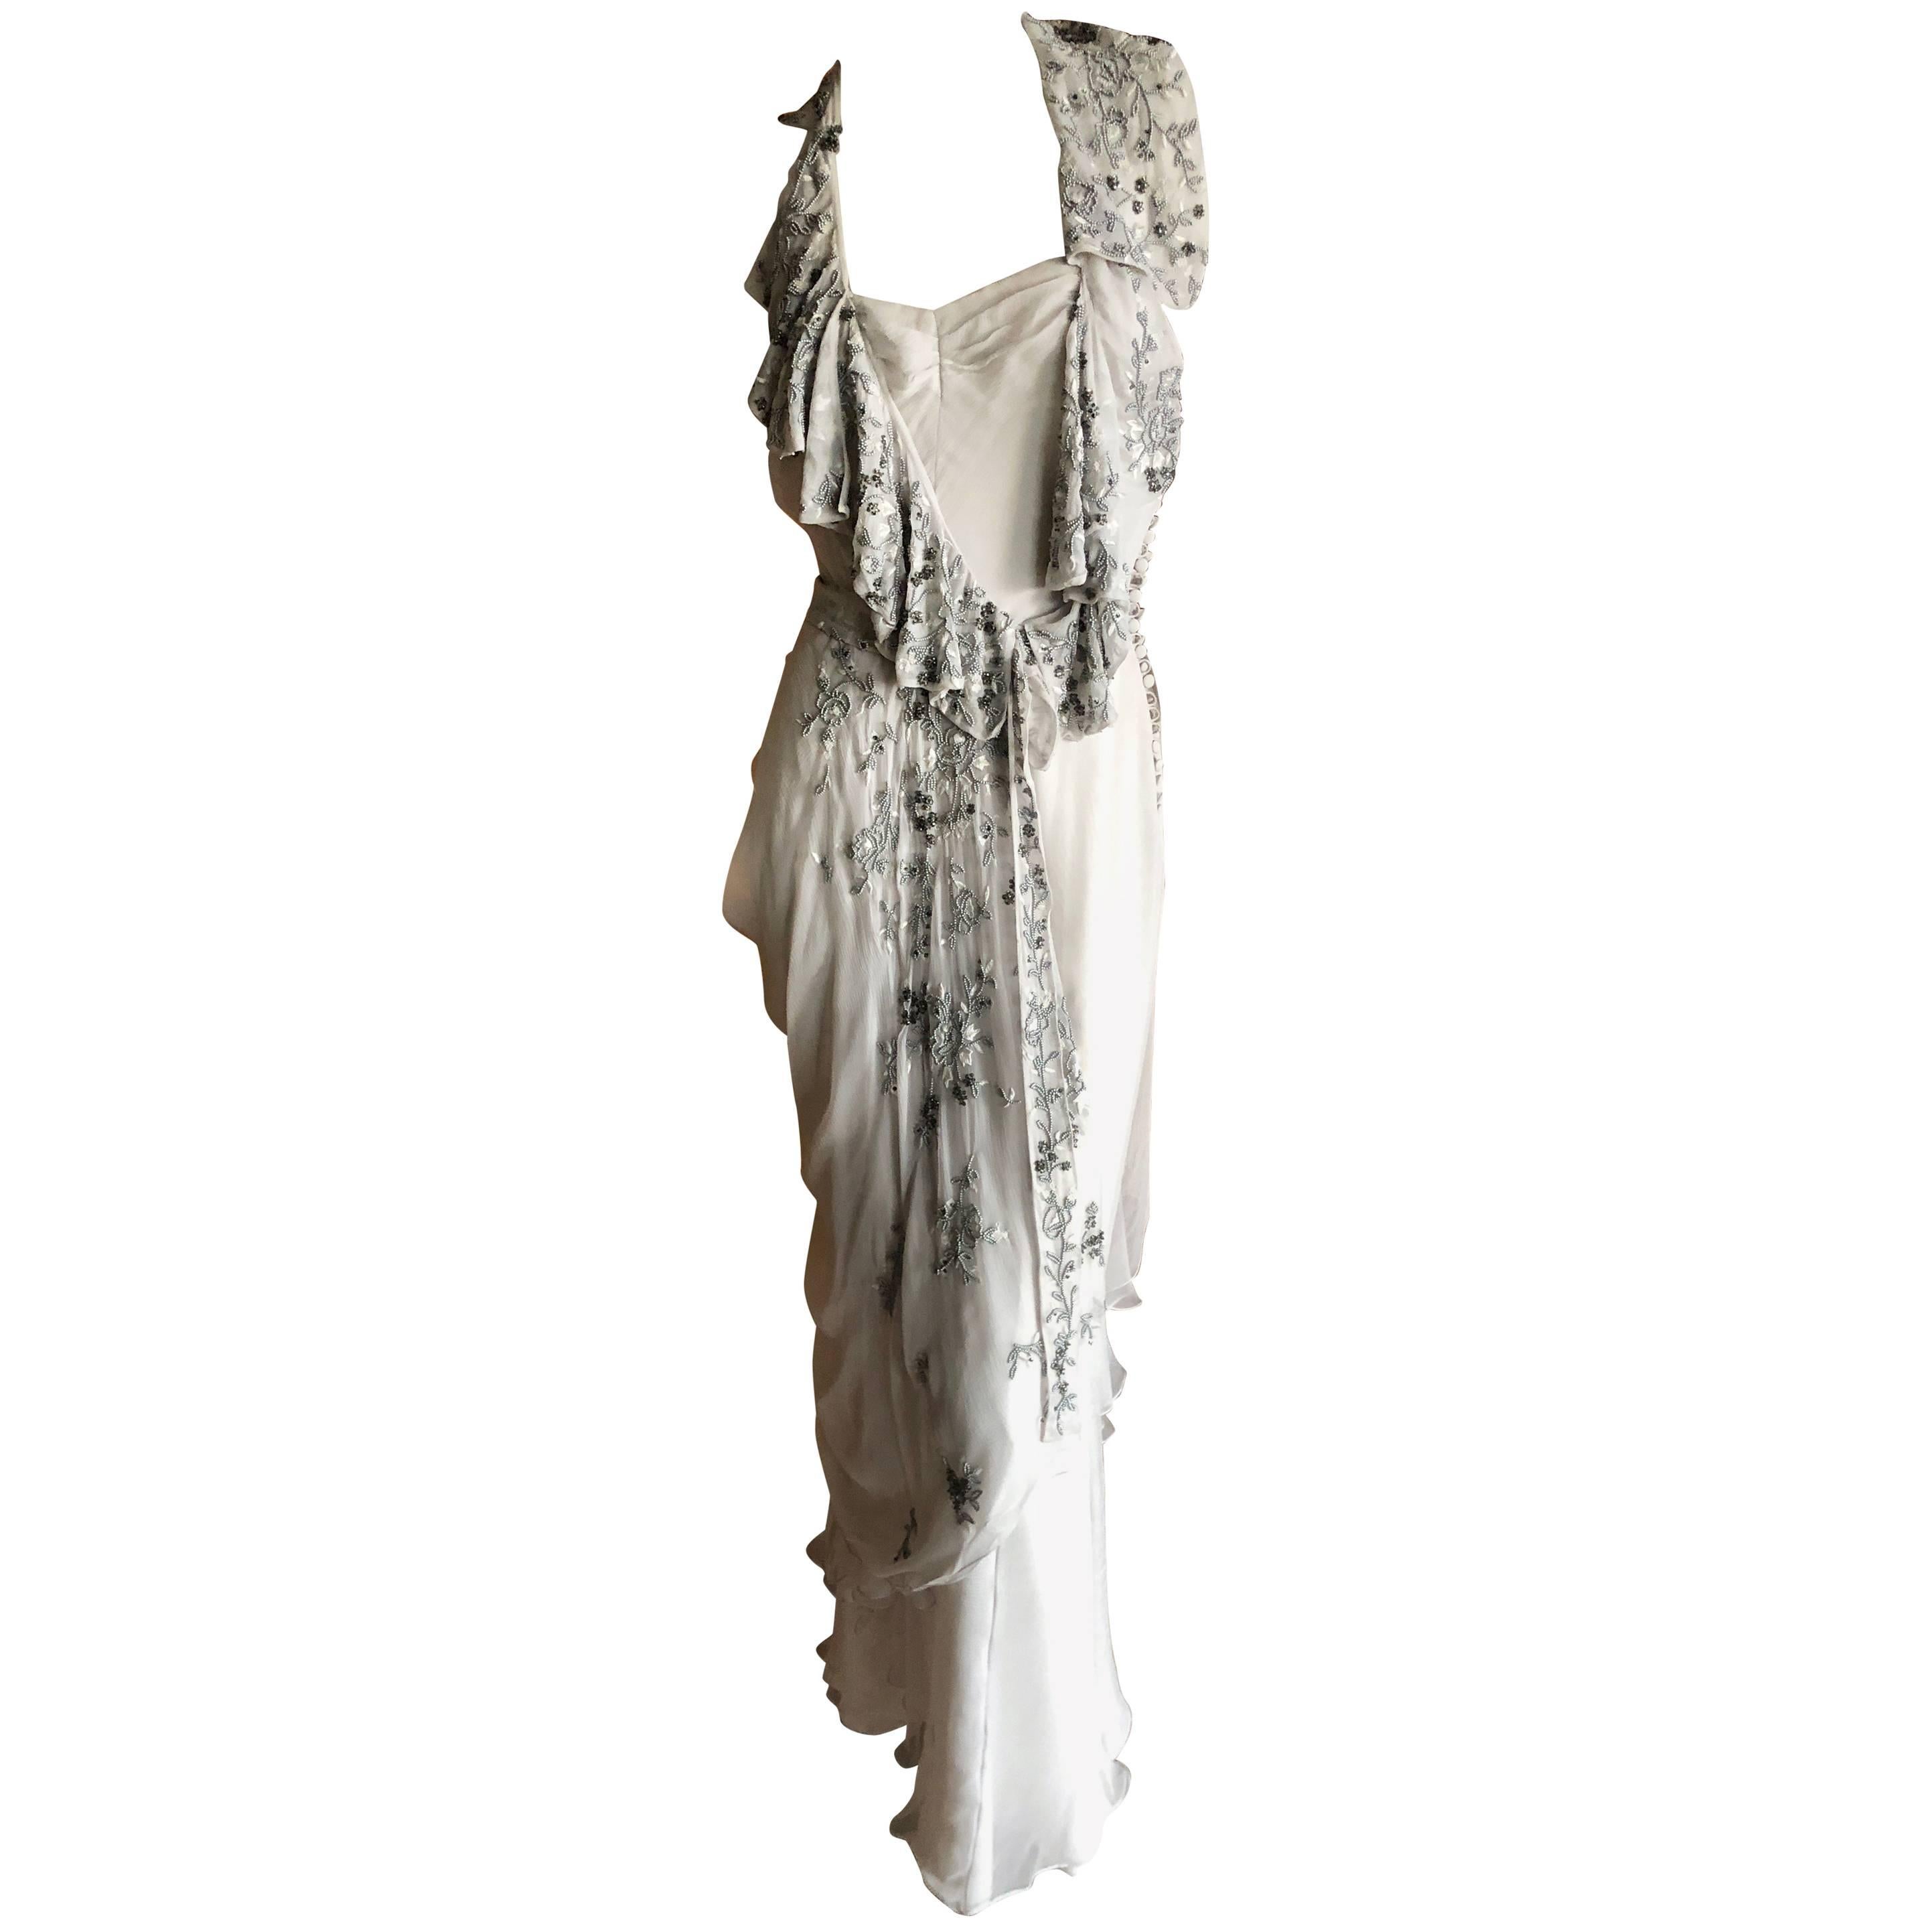 Christian Dior by John Galliano Dove Gray Evening Dress with Lesage Bead Flowers im Angebot